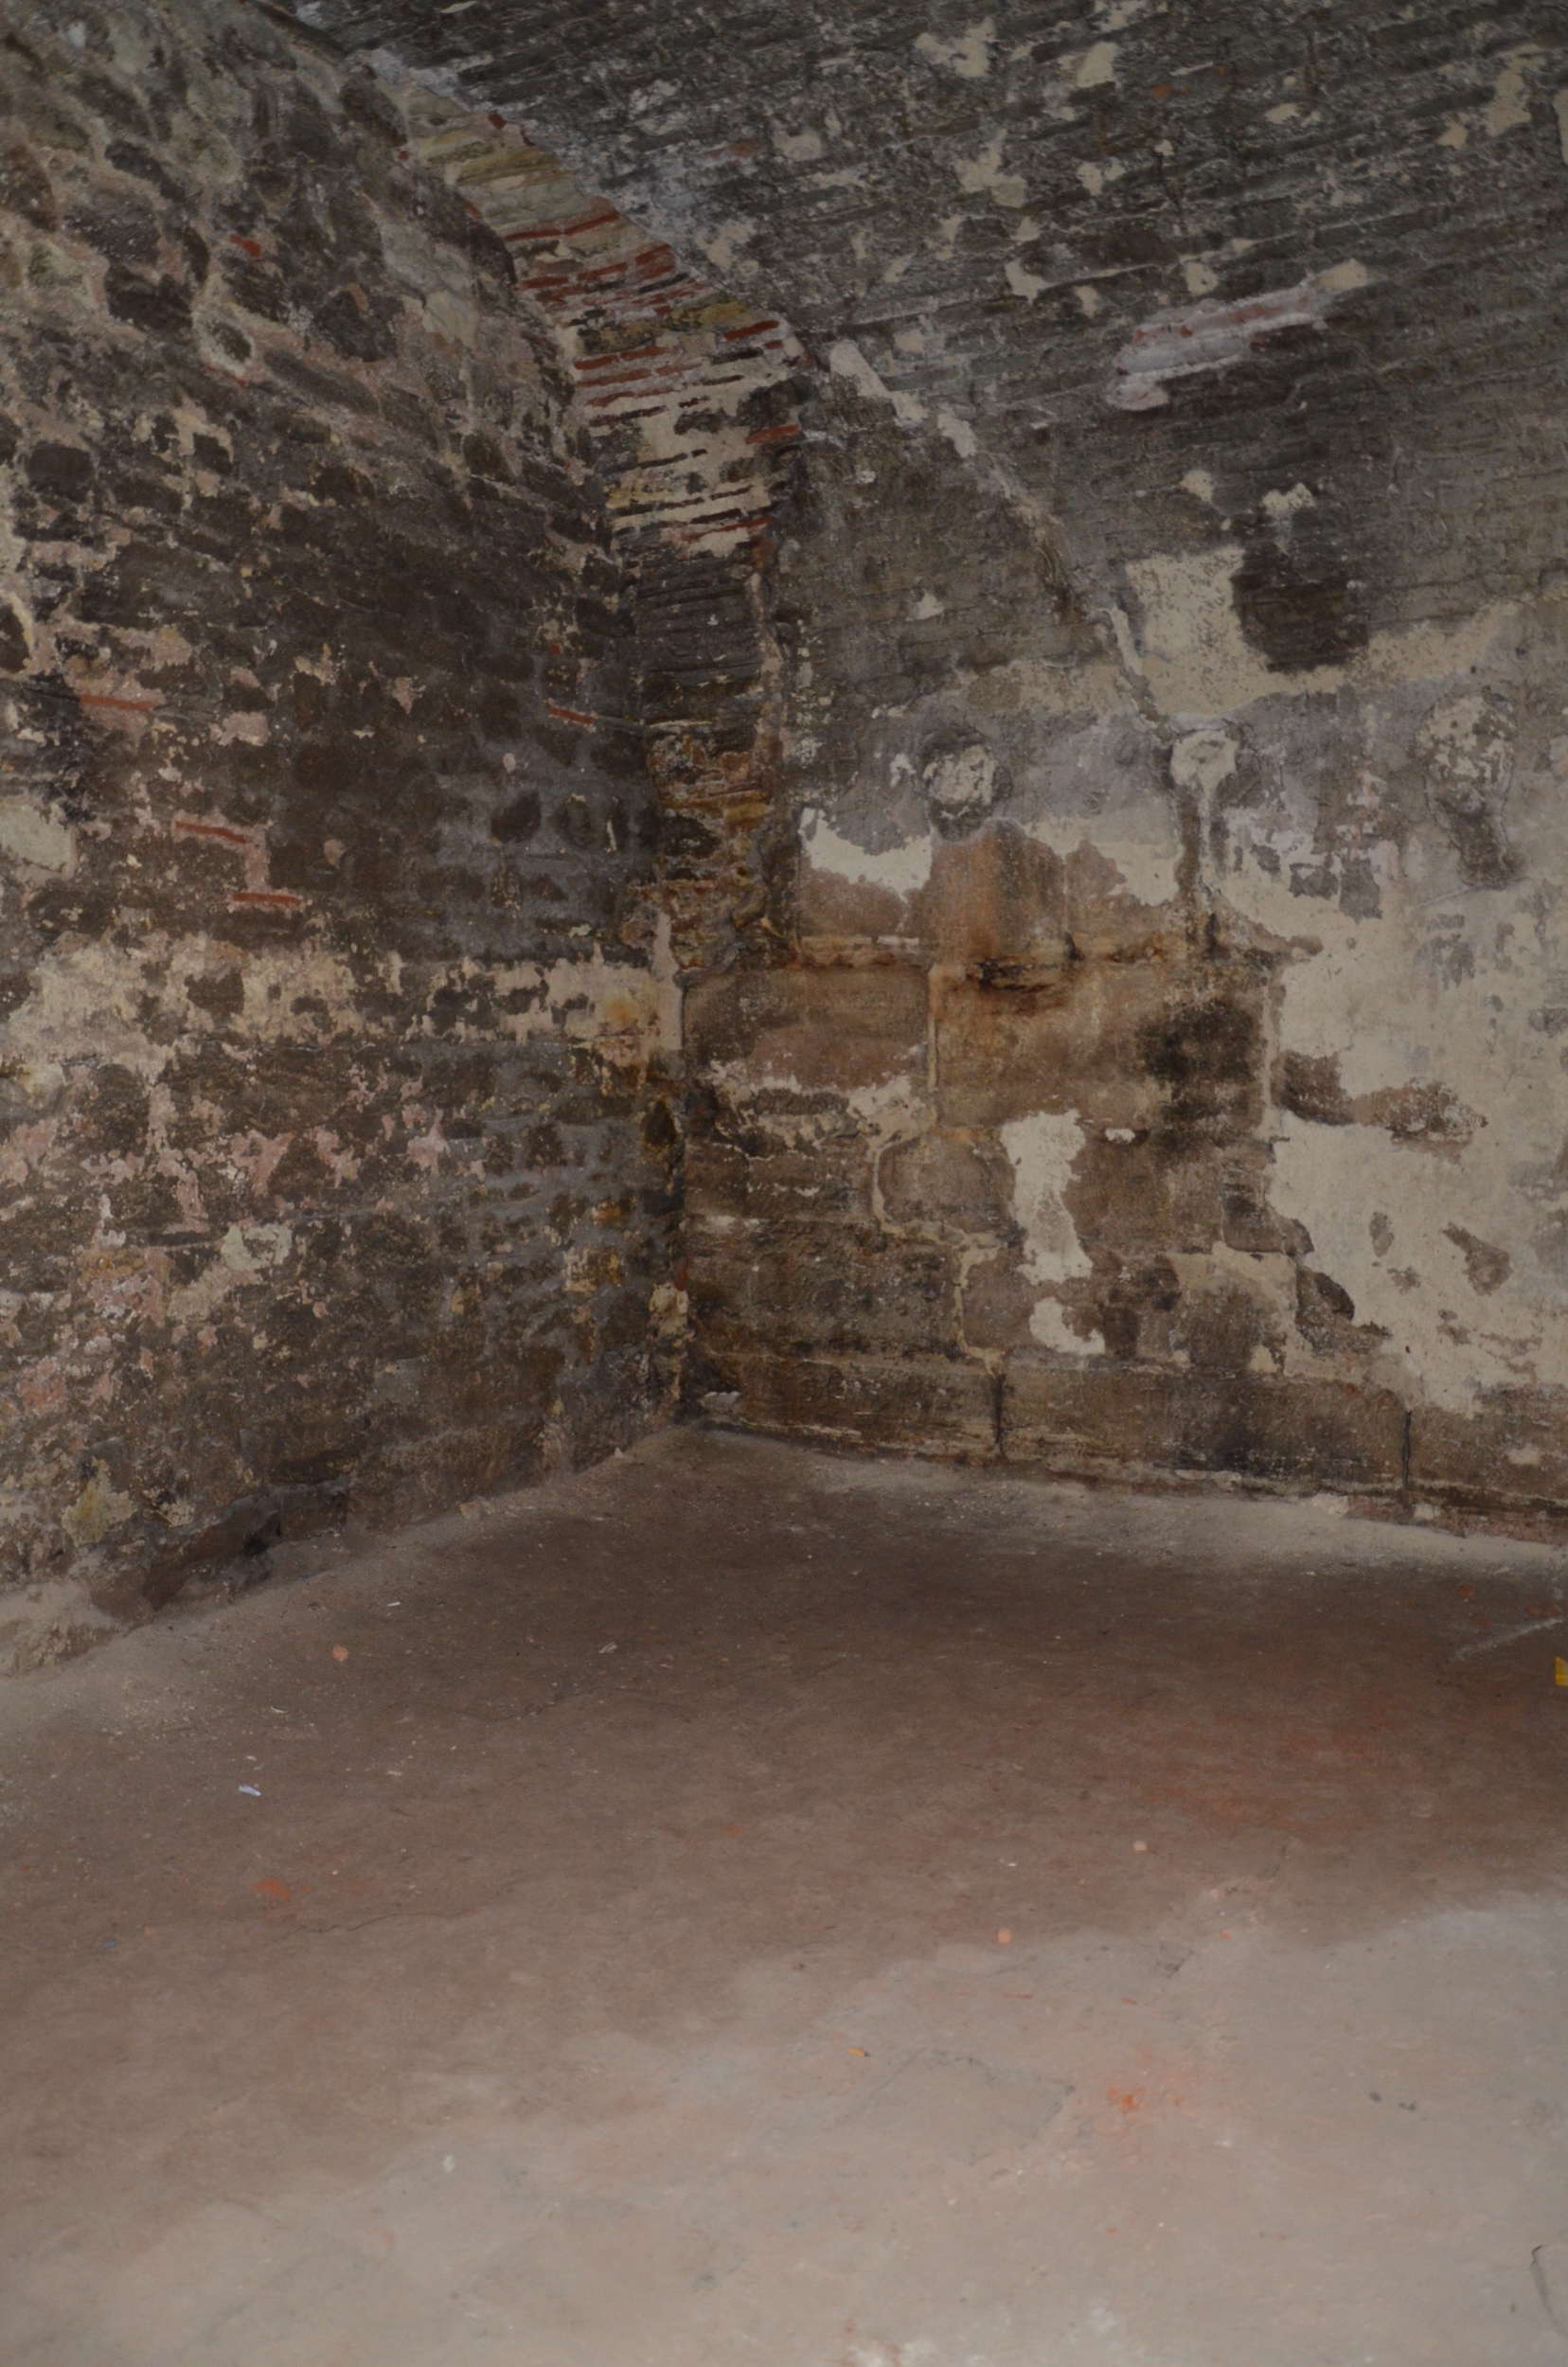 Cell of Osman II at Yedikule Fortress in Istanbul, Turkey